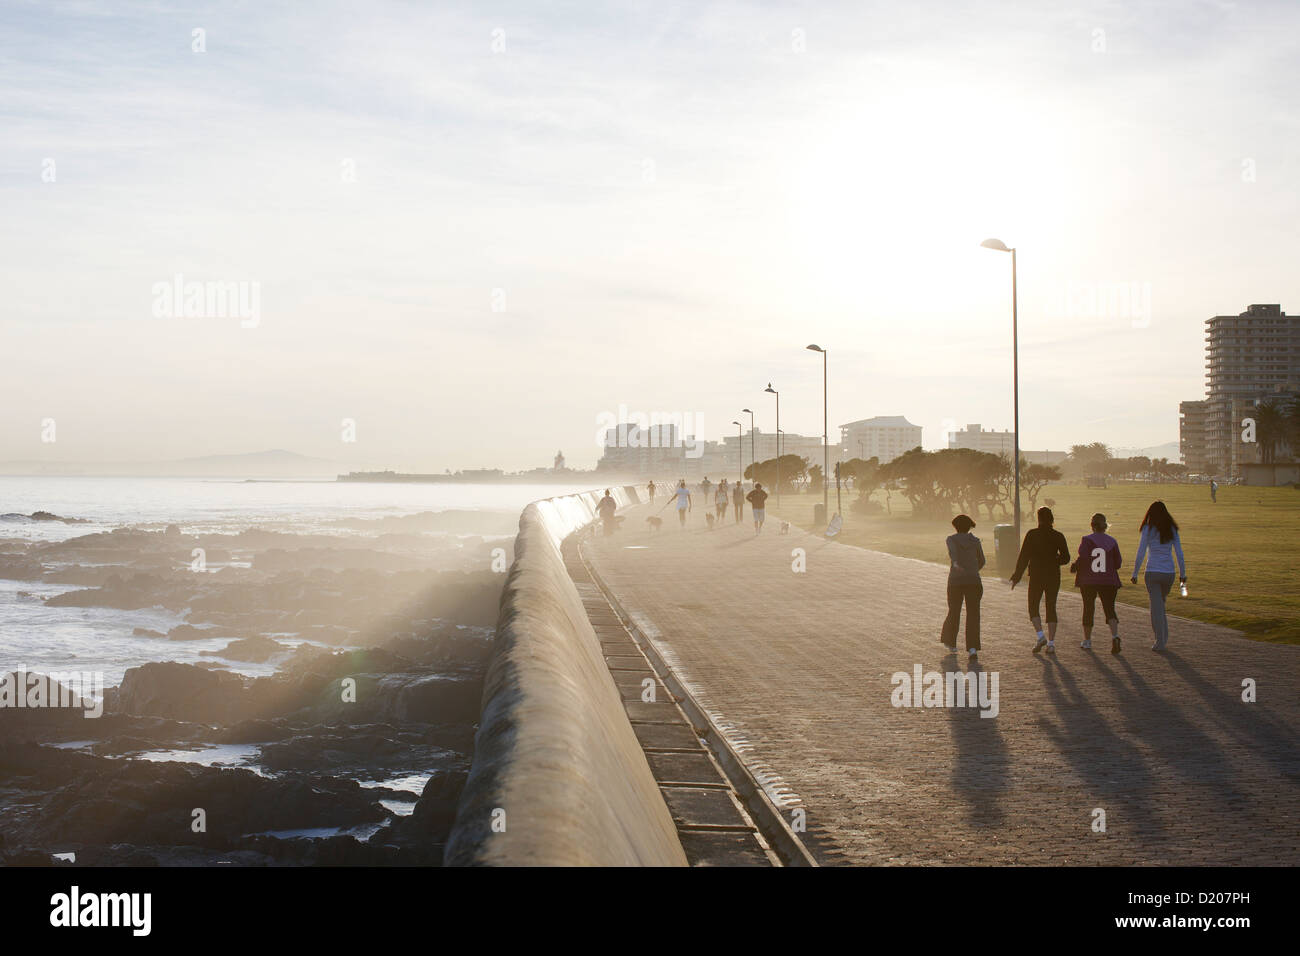 Joggers at the Seapoint boardwalk, Atlantic Seaboard, Cape Town, South Africa, Africa Stock Photo